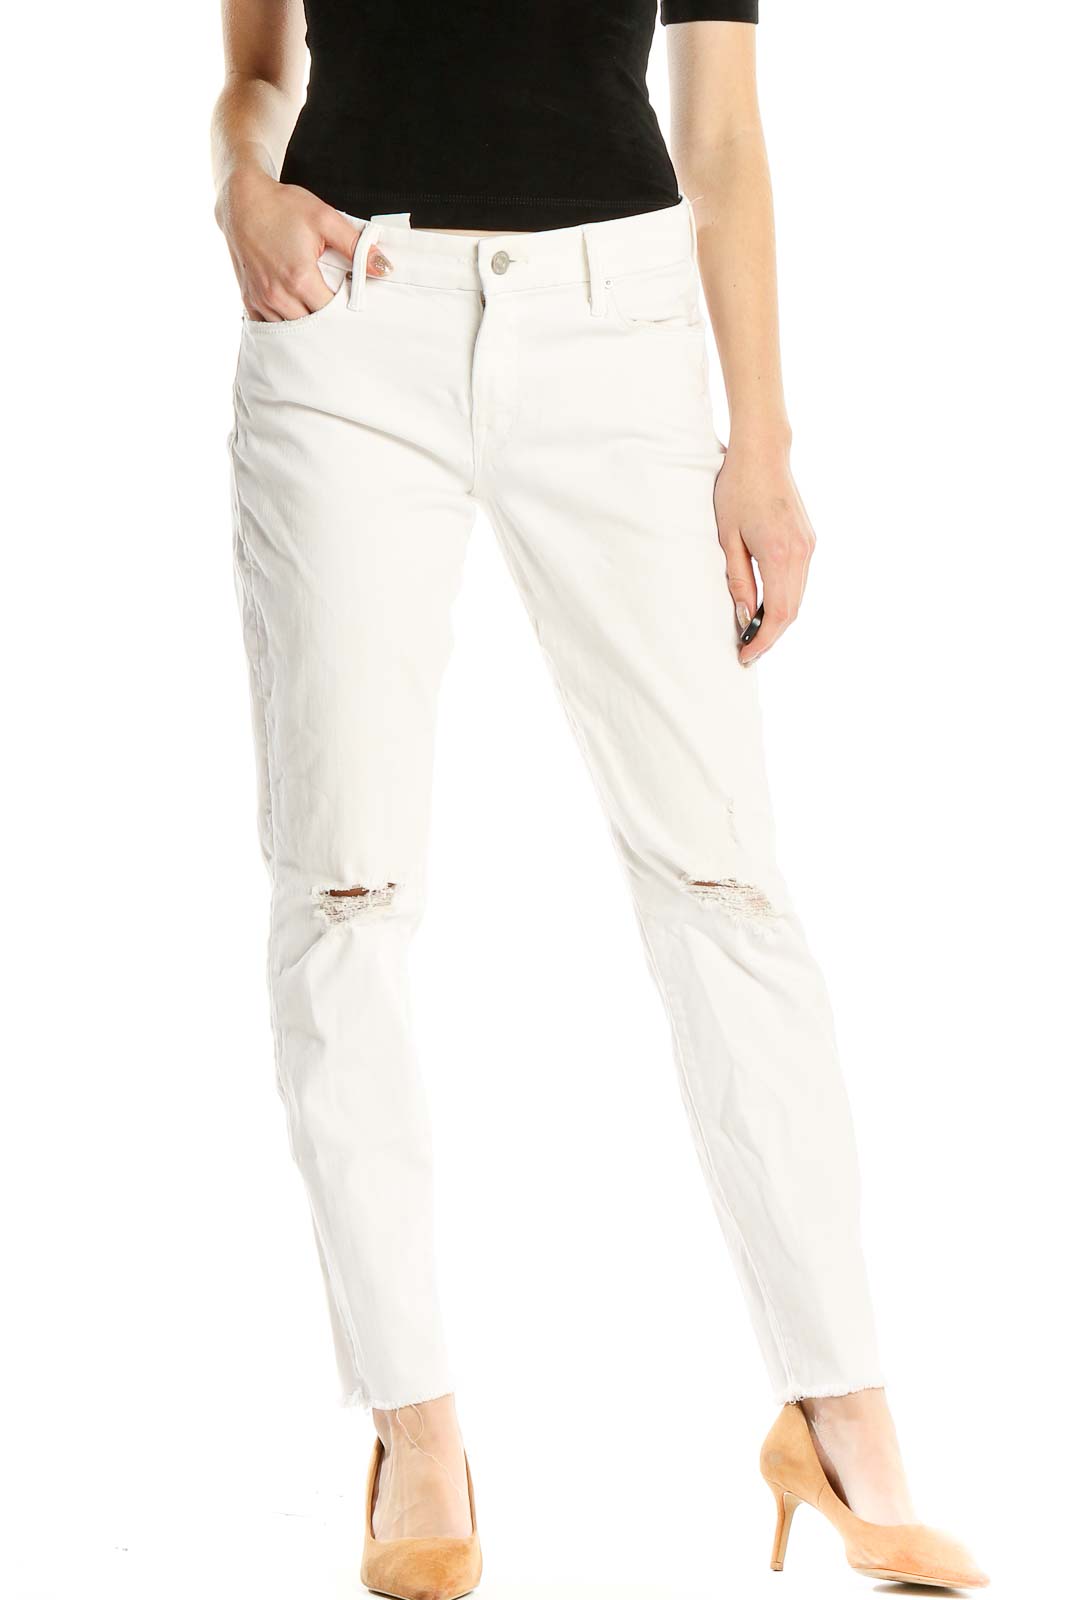 White Distressed Jeans Front